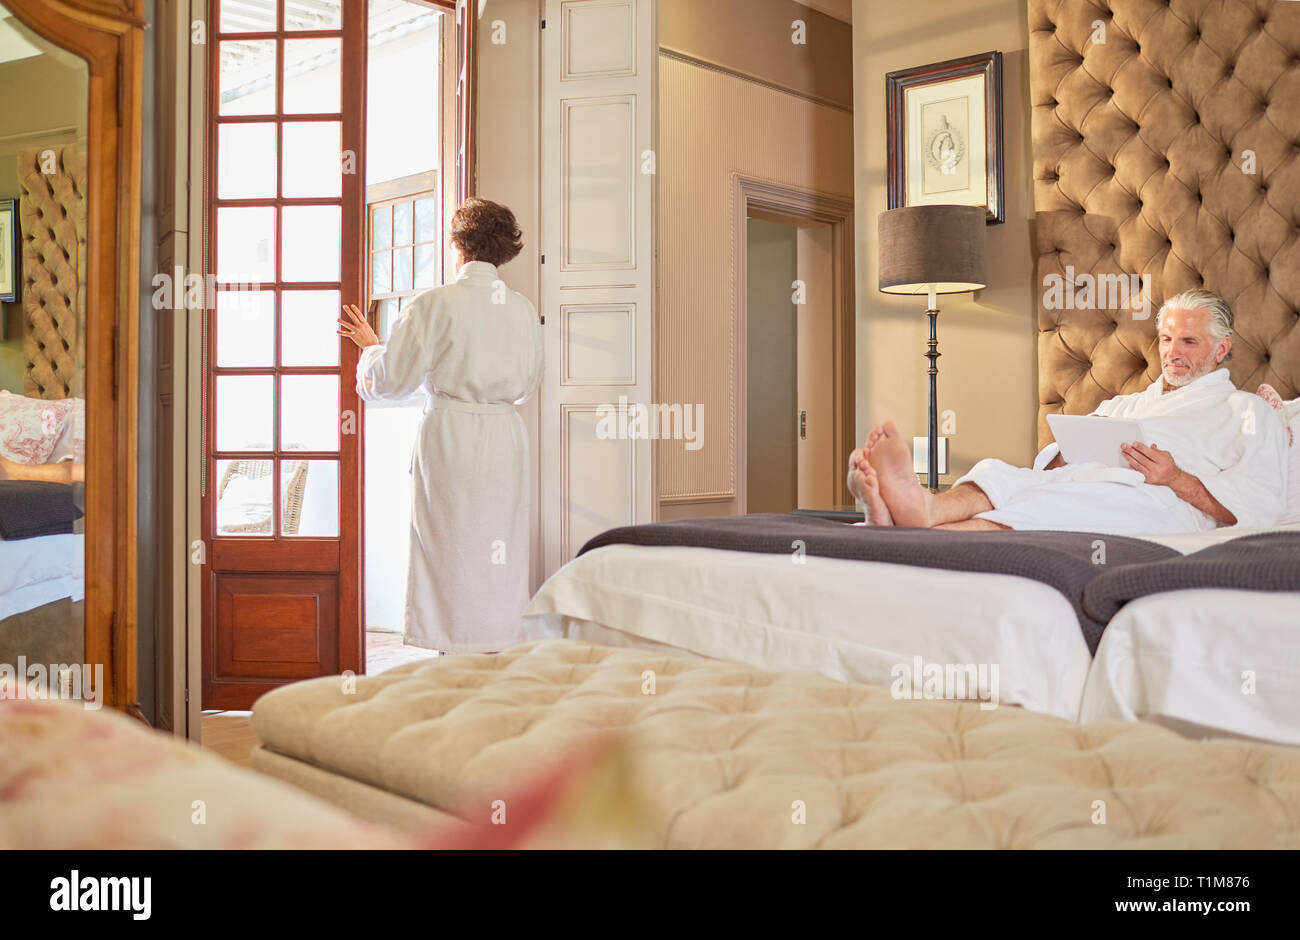 Couple in bathrobes relaxing in hotel room Stock Photo